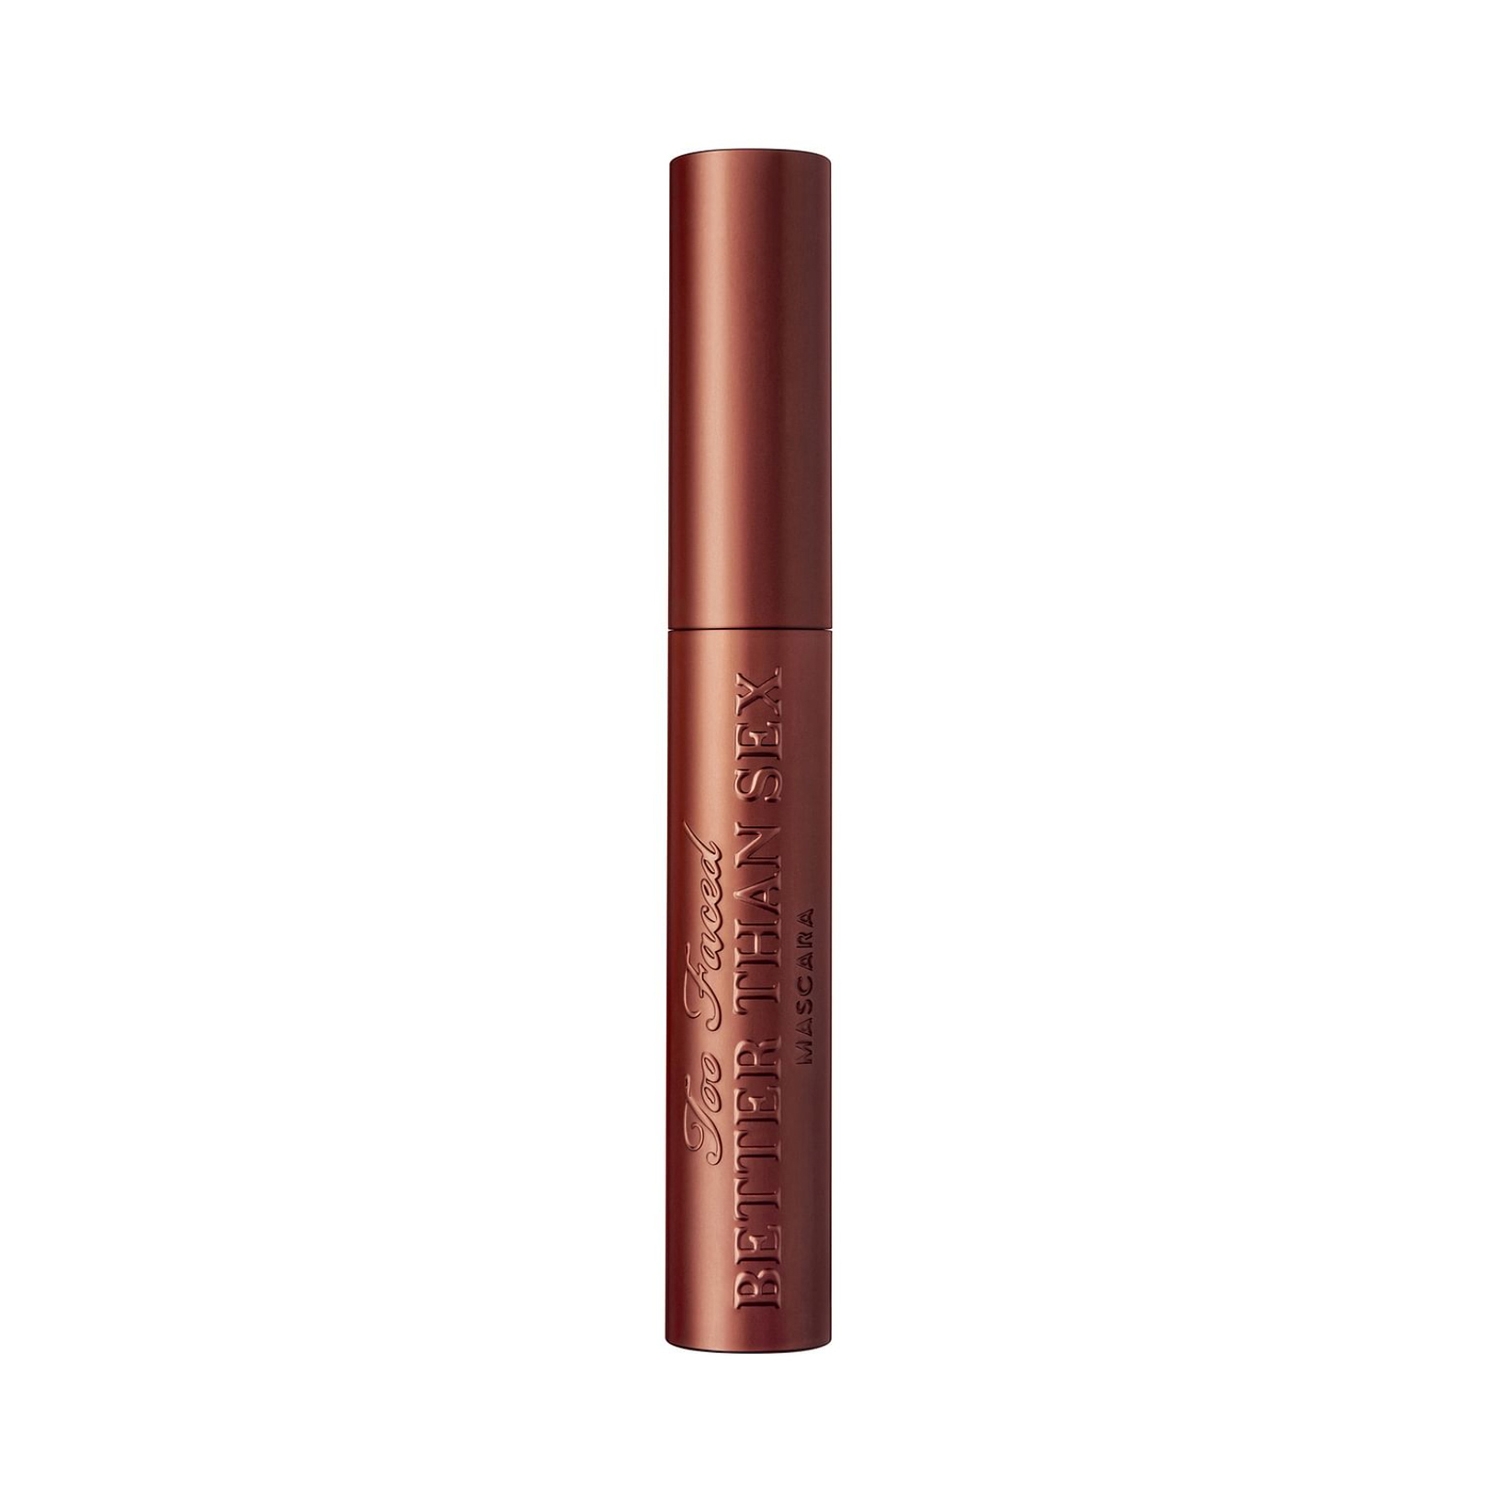 Too Faced | Too Faced Better Than Sex Mascara - Chocolate (8ml)